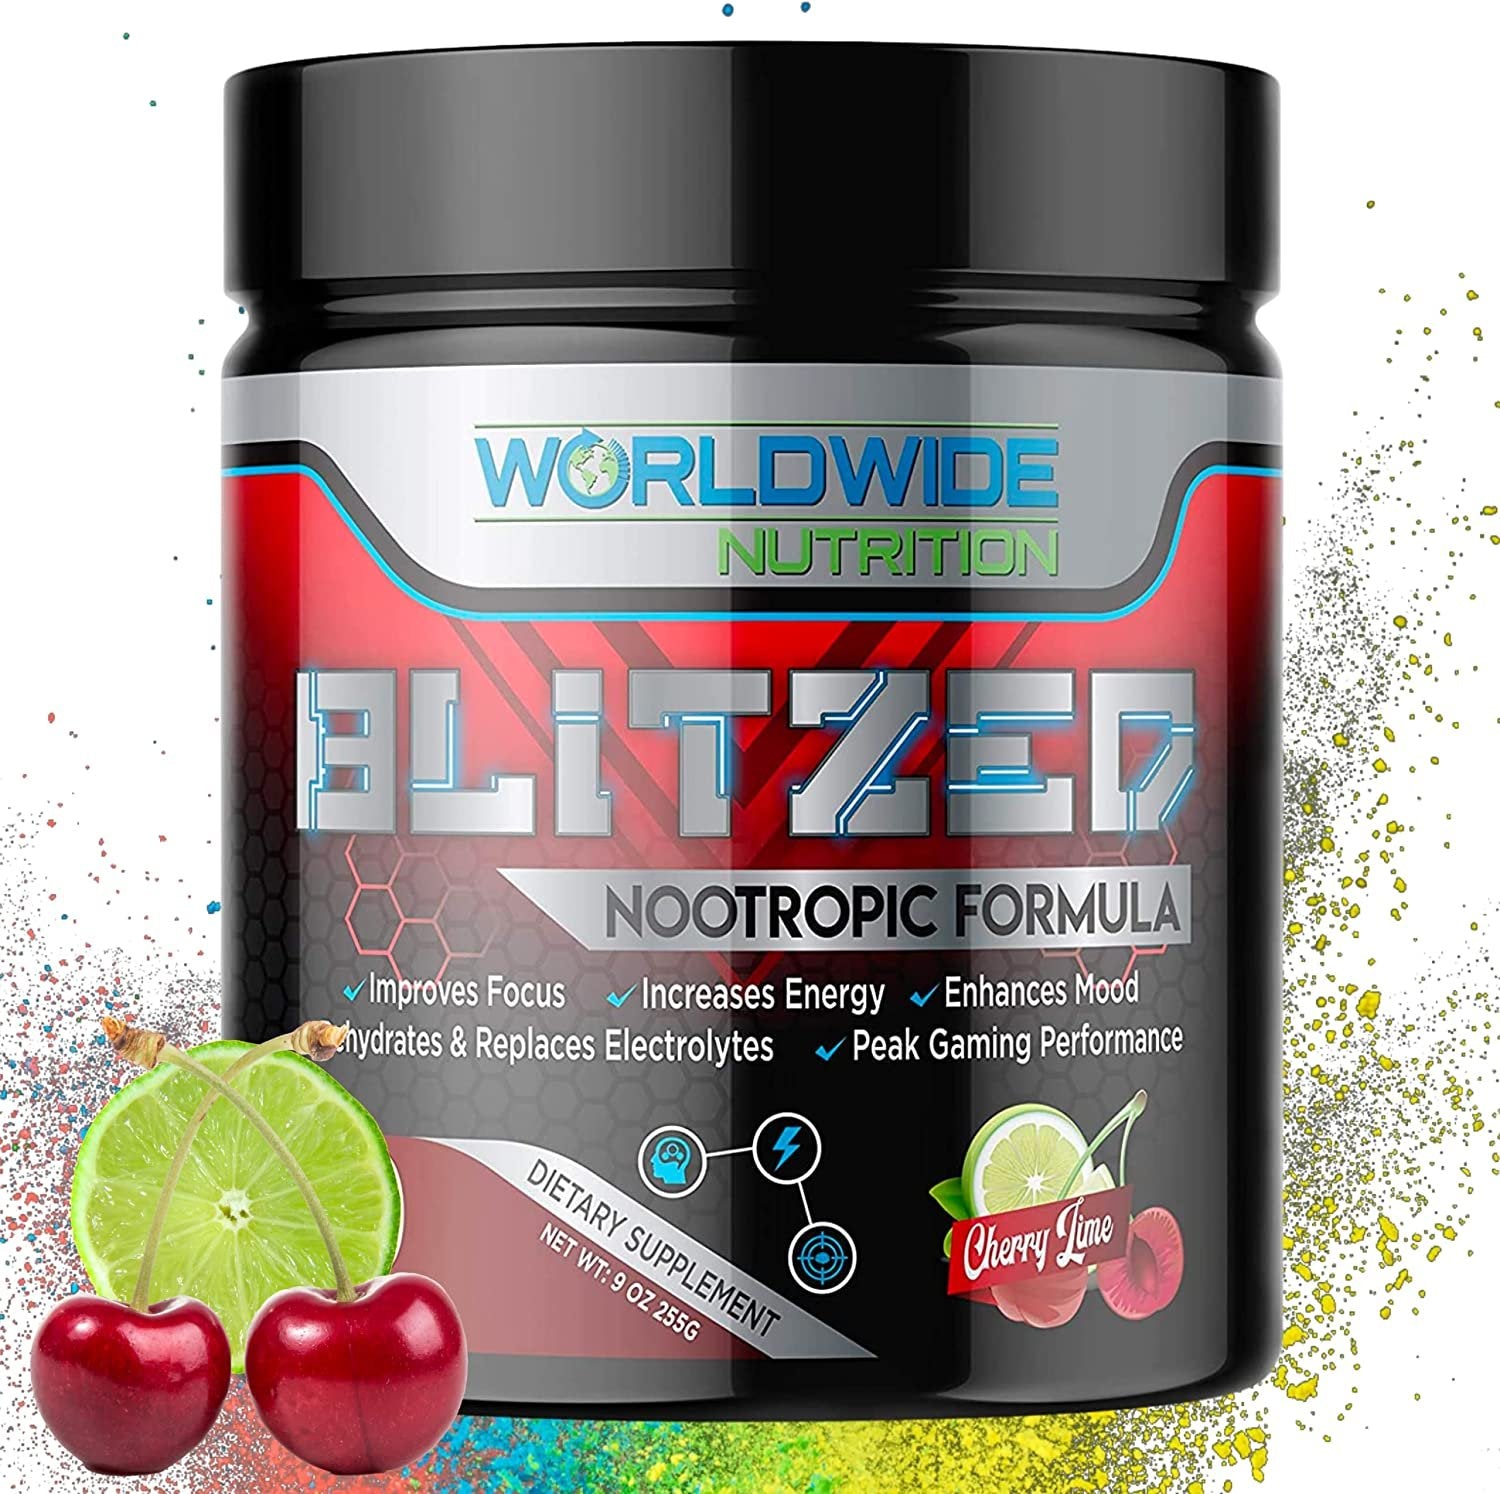 Worldwide Nutrition Blitzed Nootropic Formula - All Natural Energy Drink Mix Powder - Brain Supplements for Memory and Focus - Enhanced Focus and Energy Supplement- Cherry Lime Flavor - 30 Servings